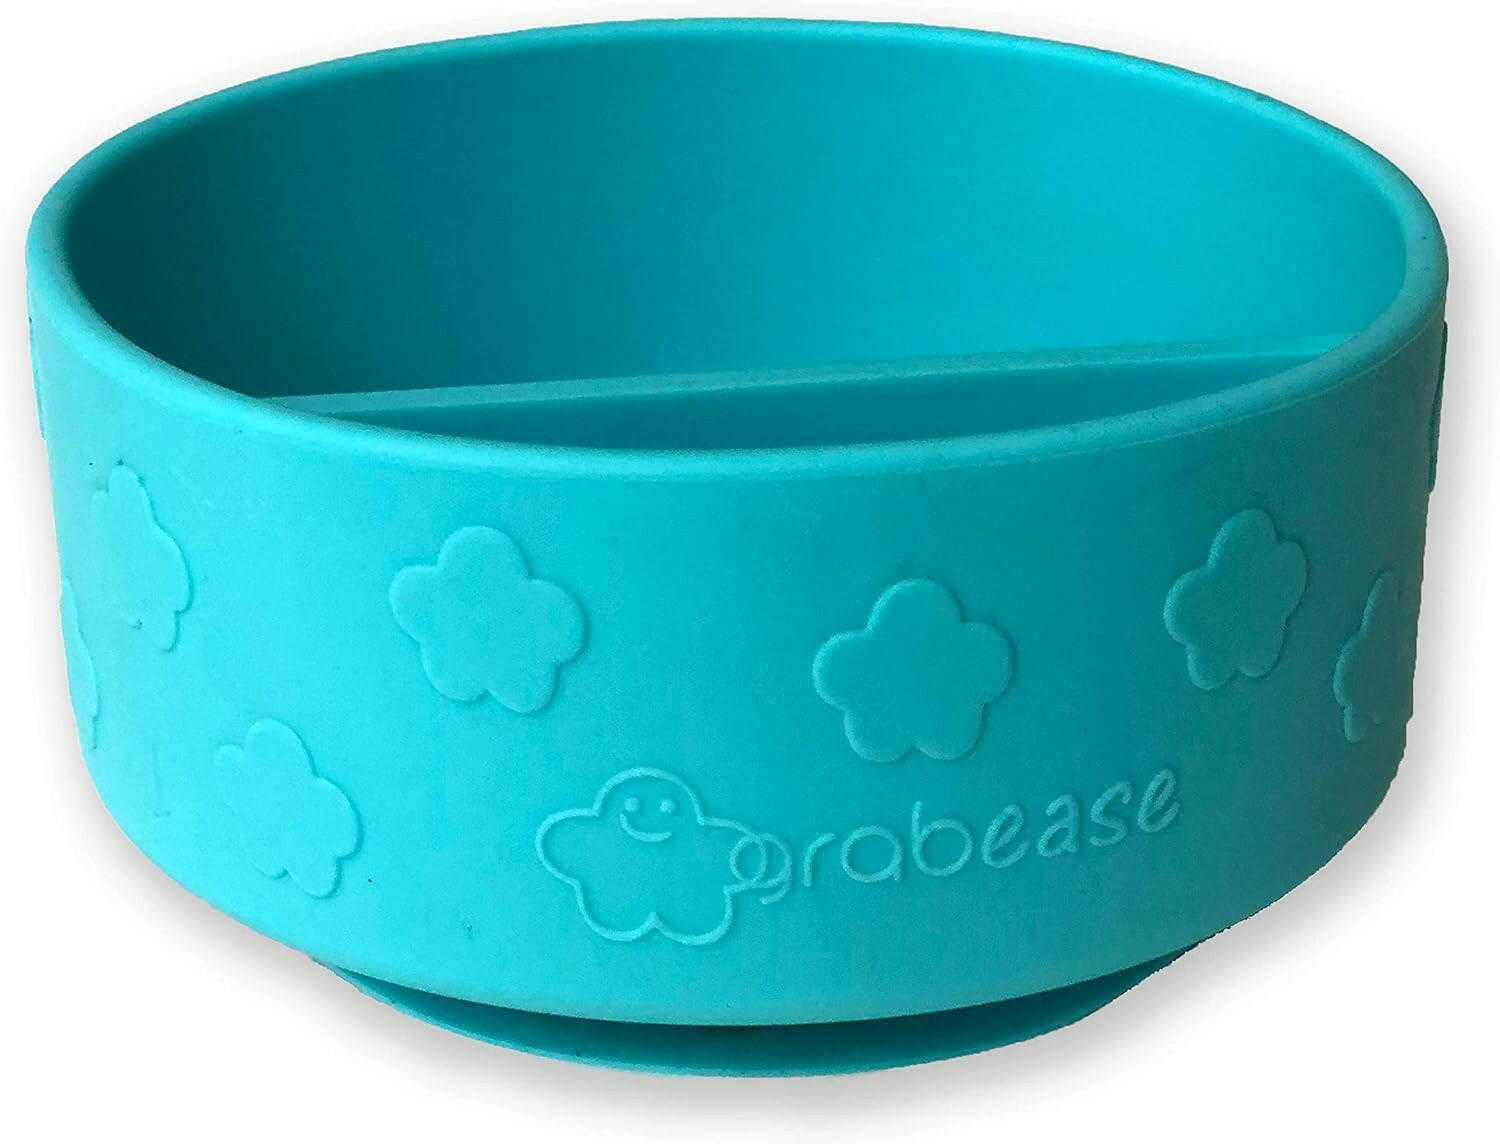 Grabease Baby Bowls Silicone Bowls for Toddler Baby Feeding Divided Bowl, Dishwasher and Sterilizer Safe